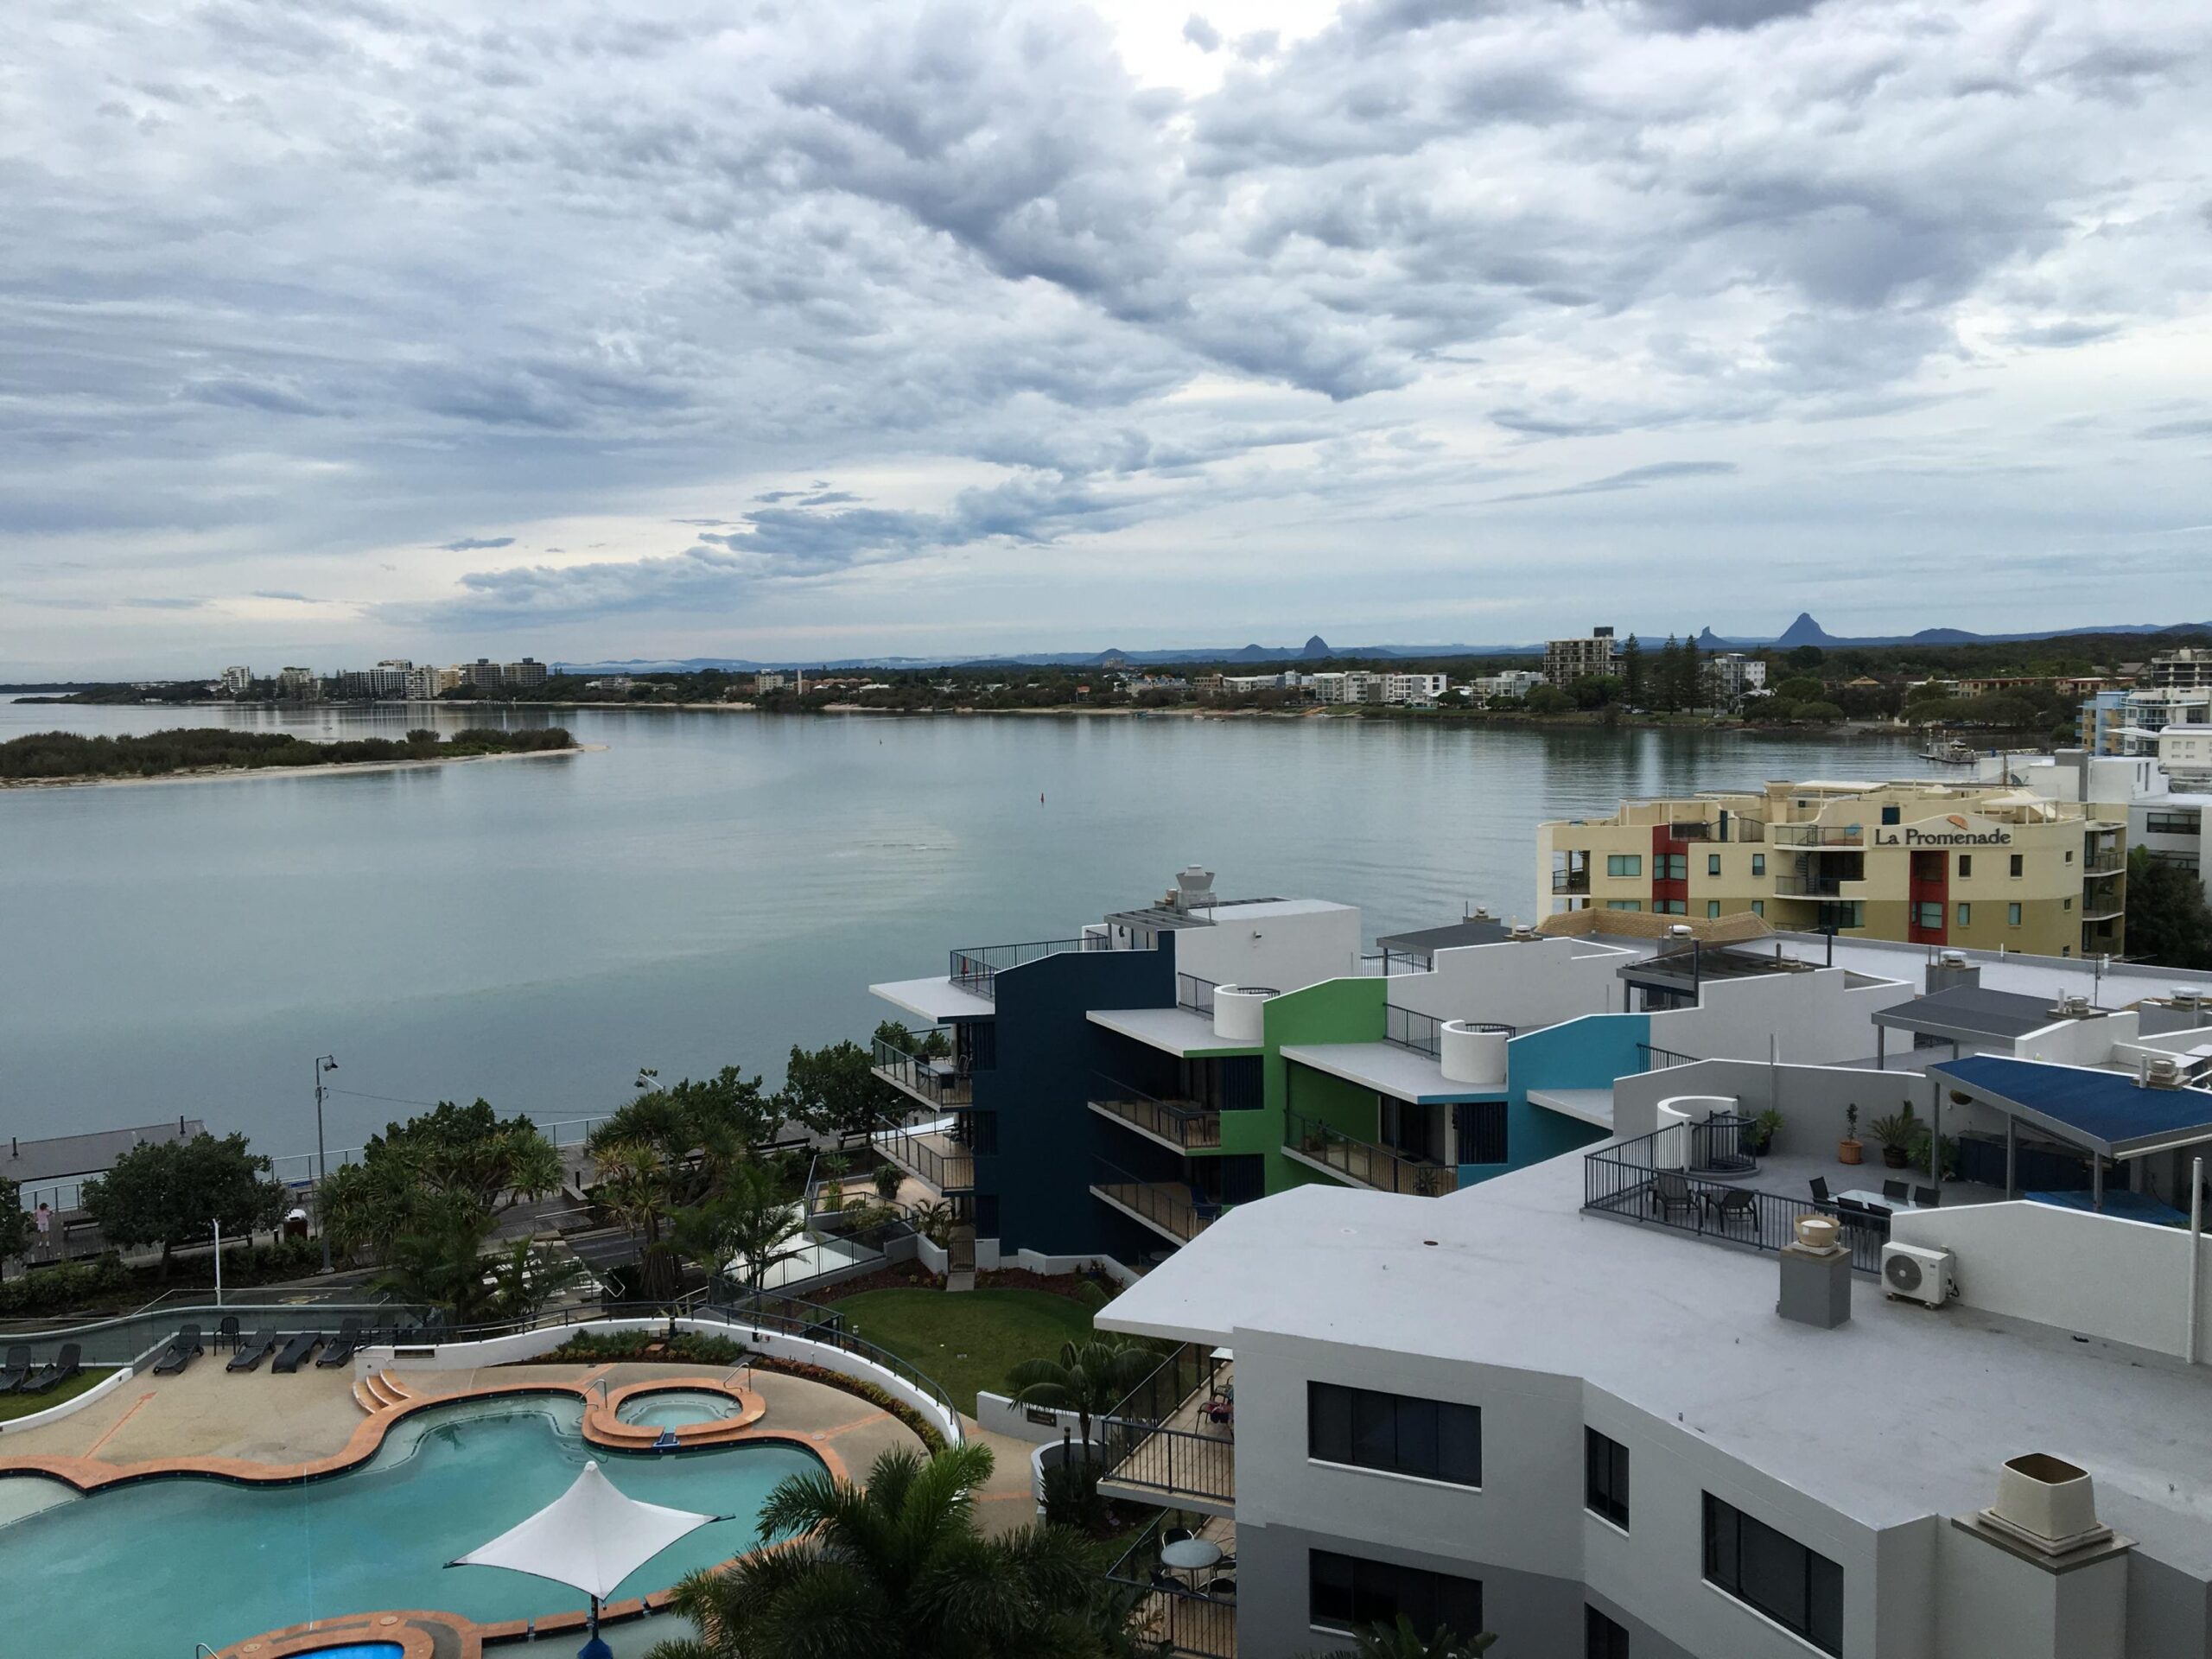 View of Caloundra and Brisbane from the Monaco Hotel - Photo by Allen Rieland